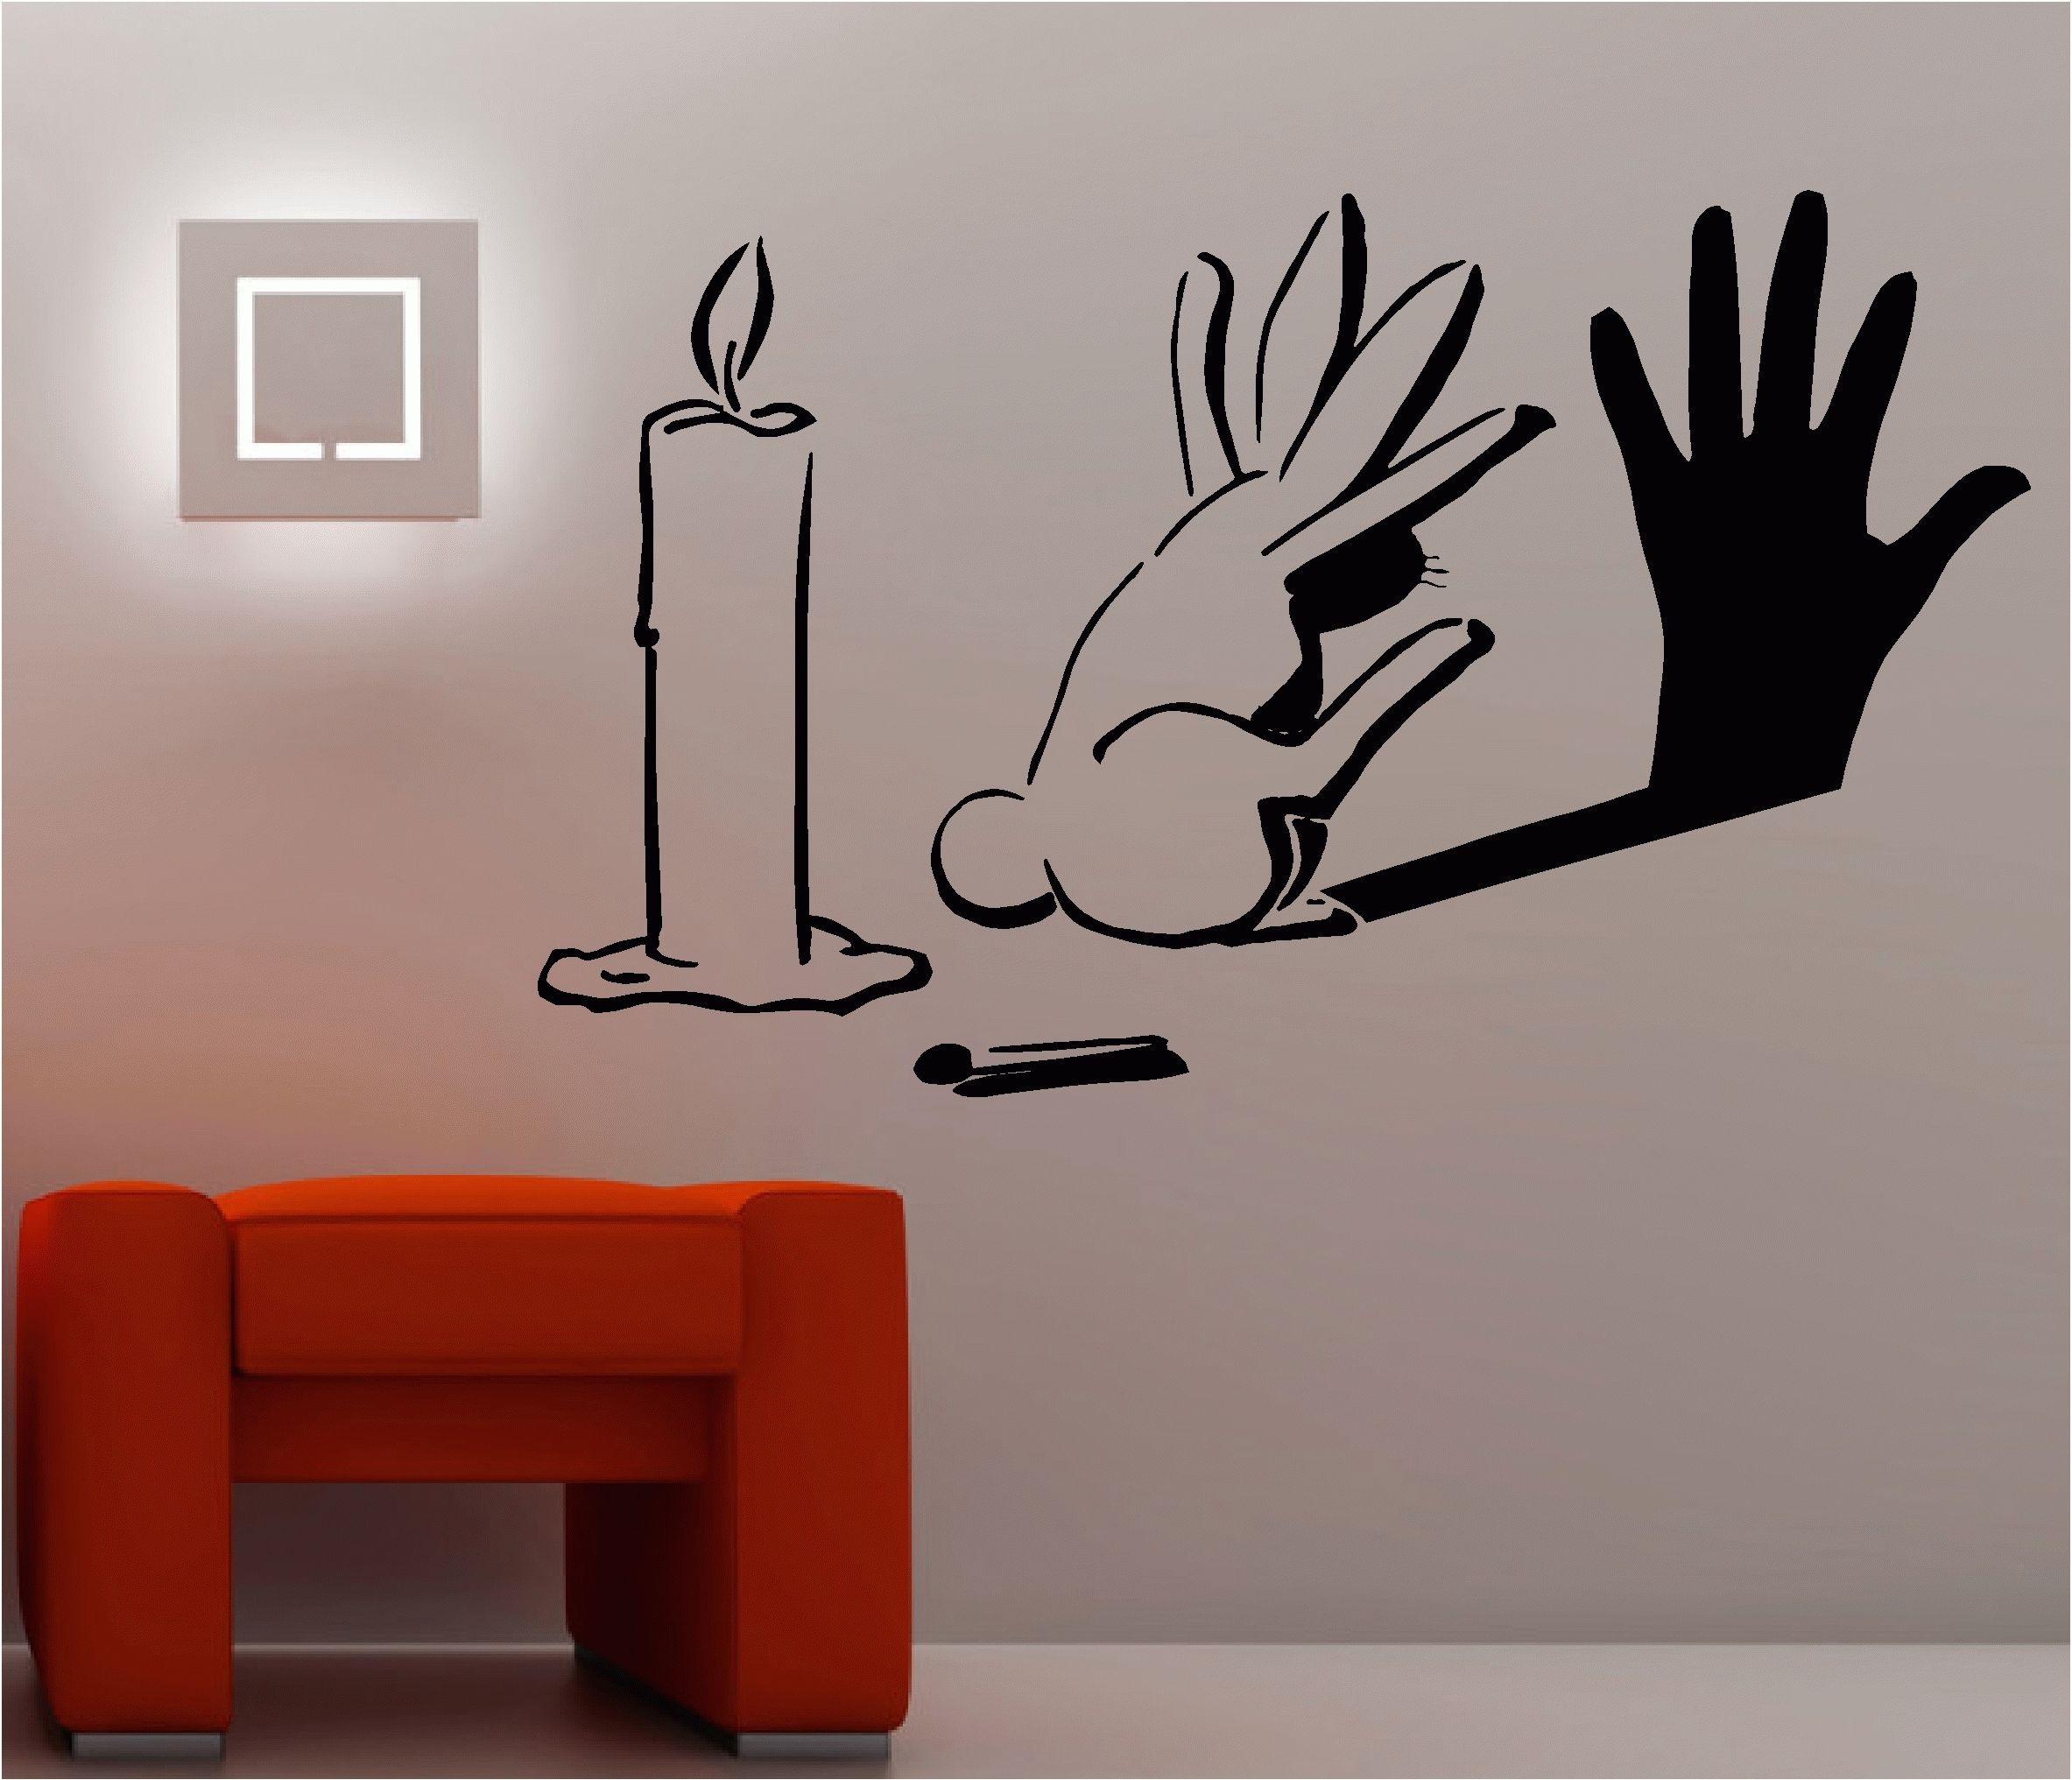 Rabbit Shadow Graffiti Wall Art Sticker Lounge Bedroom Kitchen Within Recent Wall Art For Bedroom (View 6 of 15)